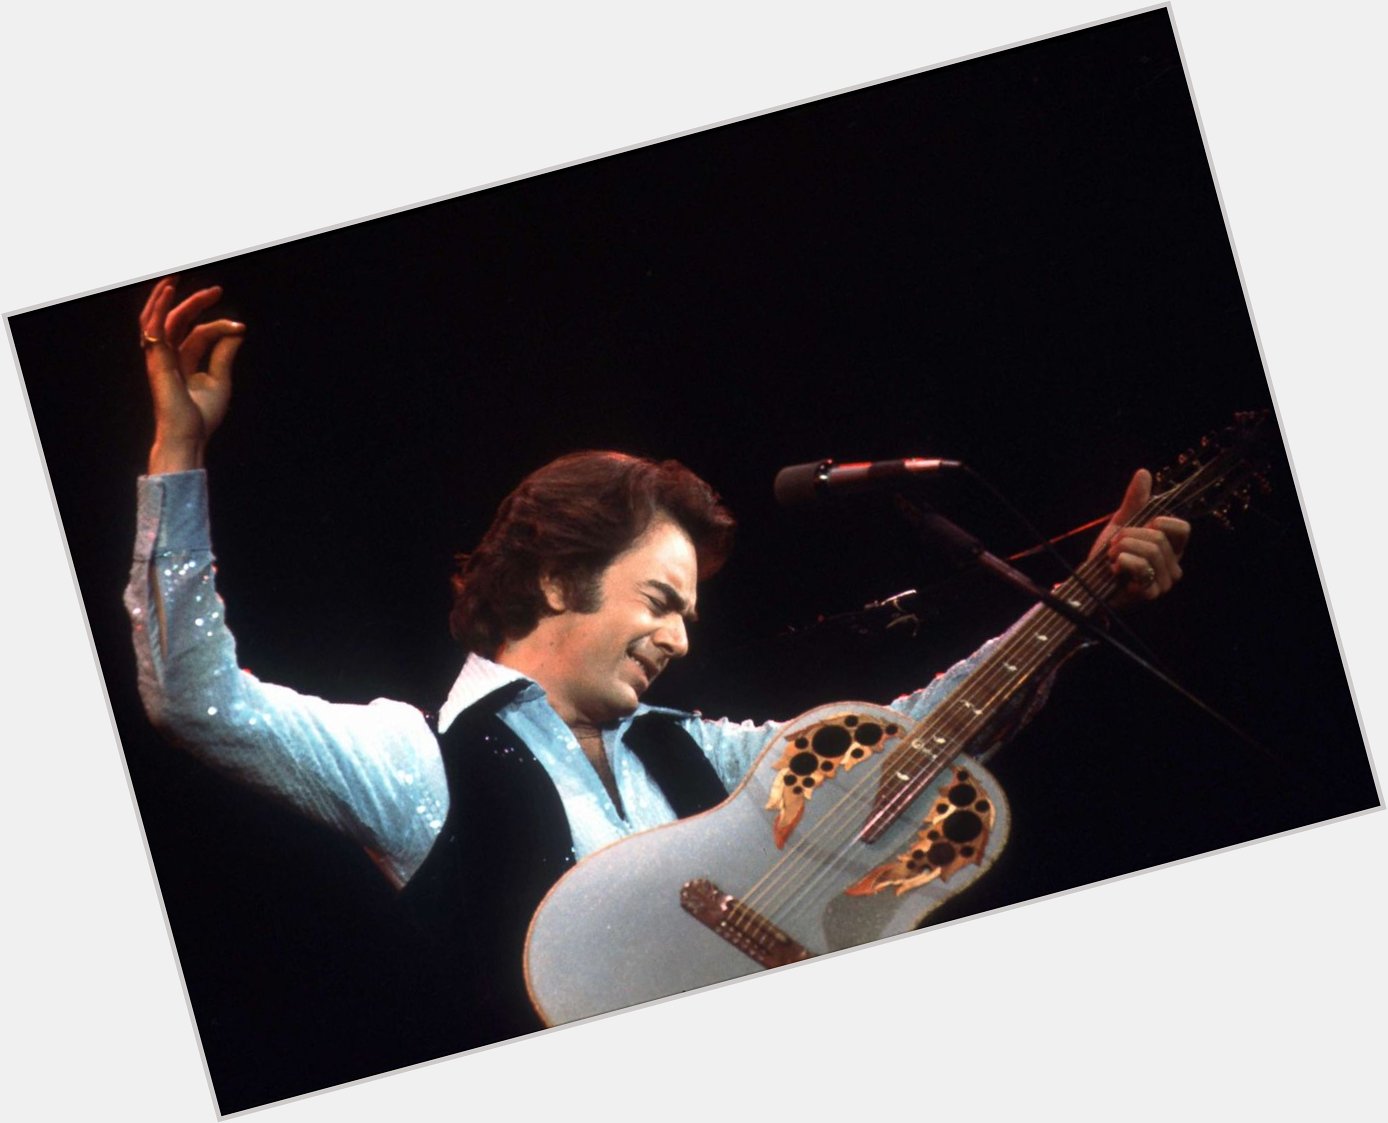 Happy birthday Neil Diamond! We dug up some lesser-known Neil covers to celebrate.
 